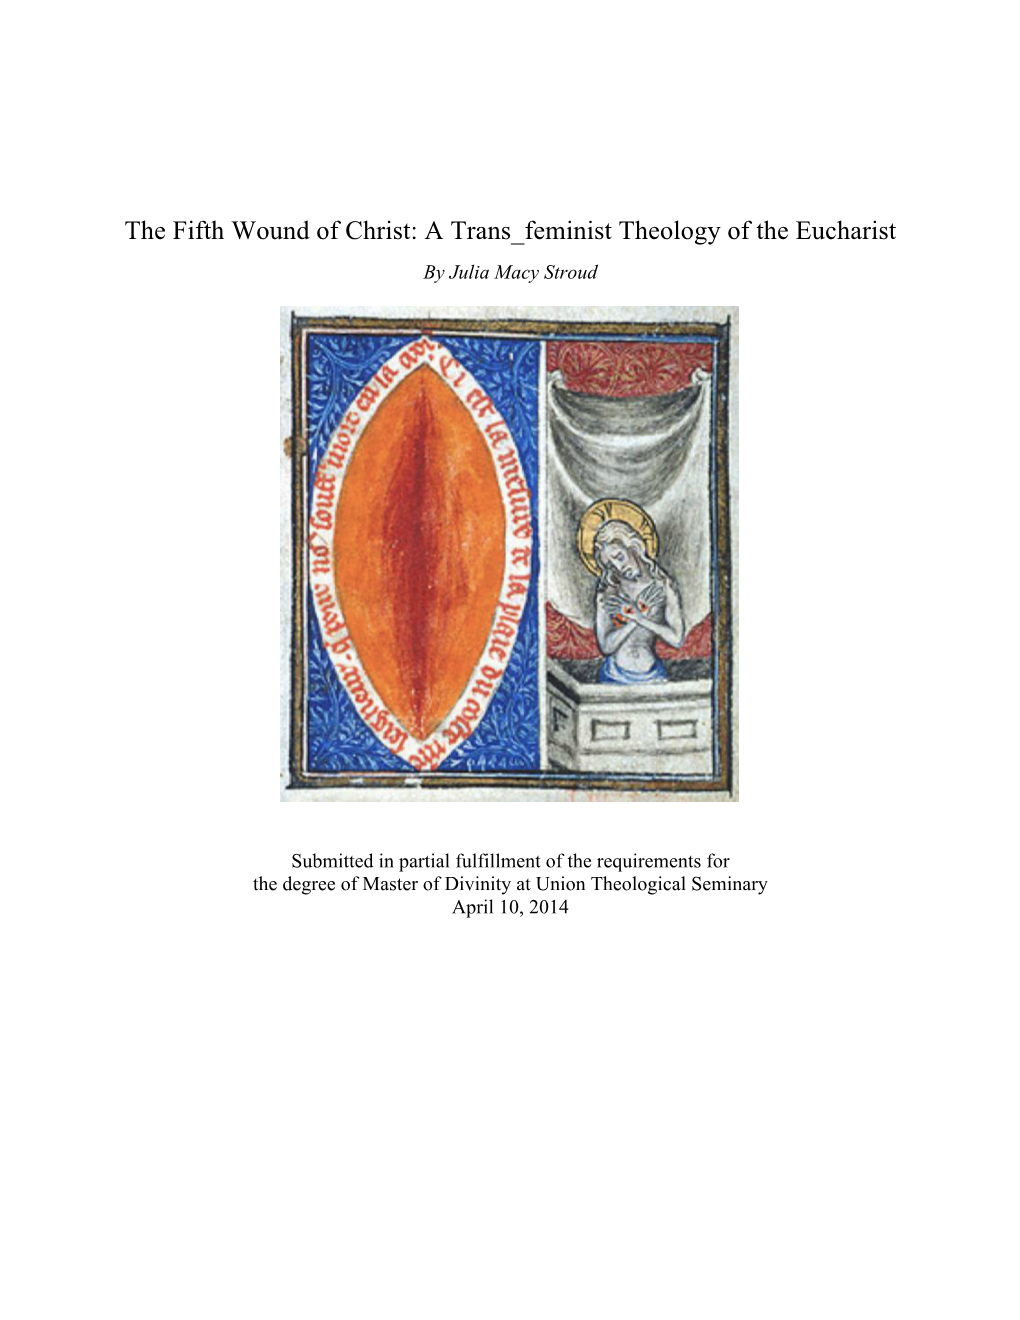 The Fifth Wound of Christ: a Trans Feminist Theology of the Eucharist